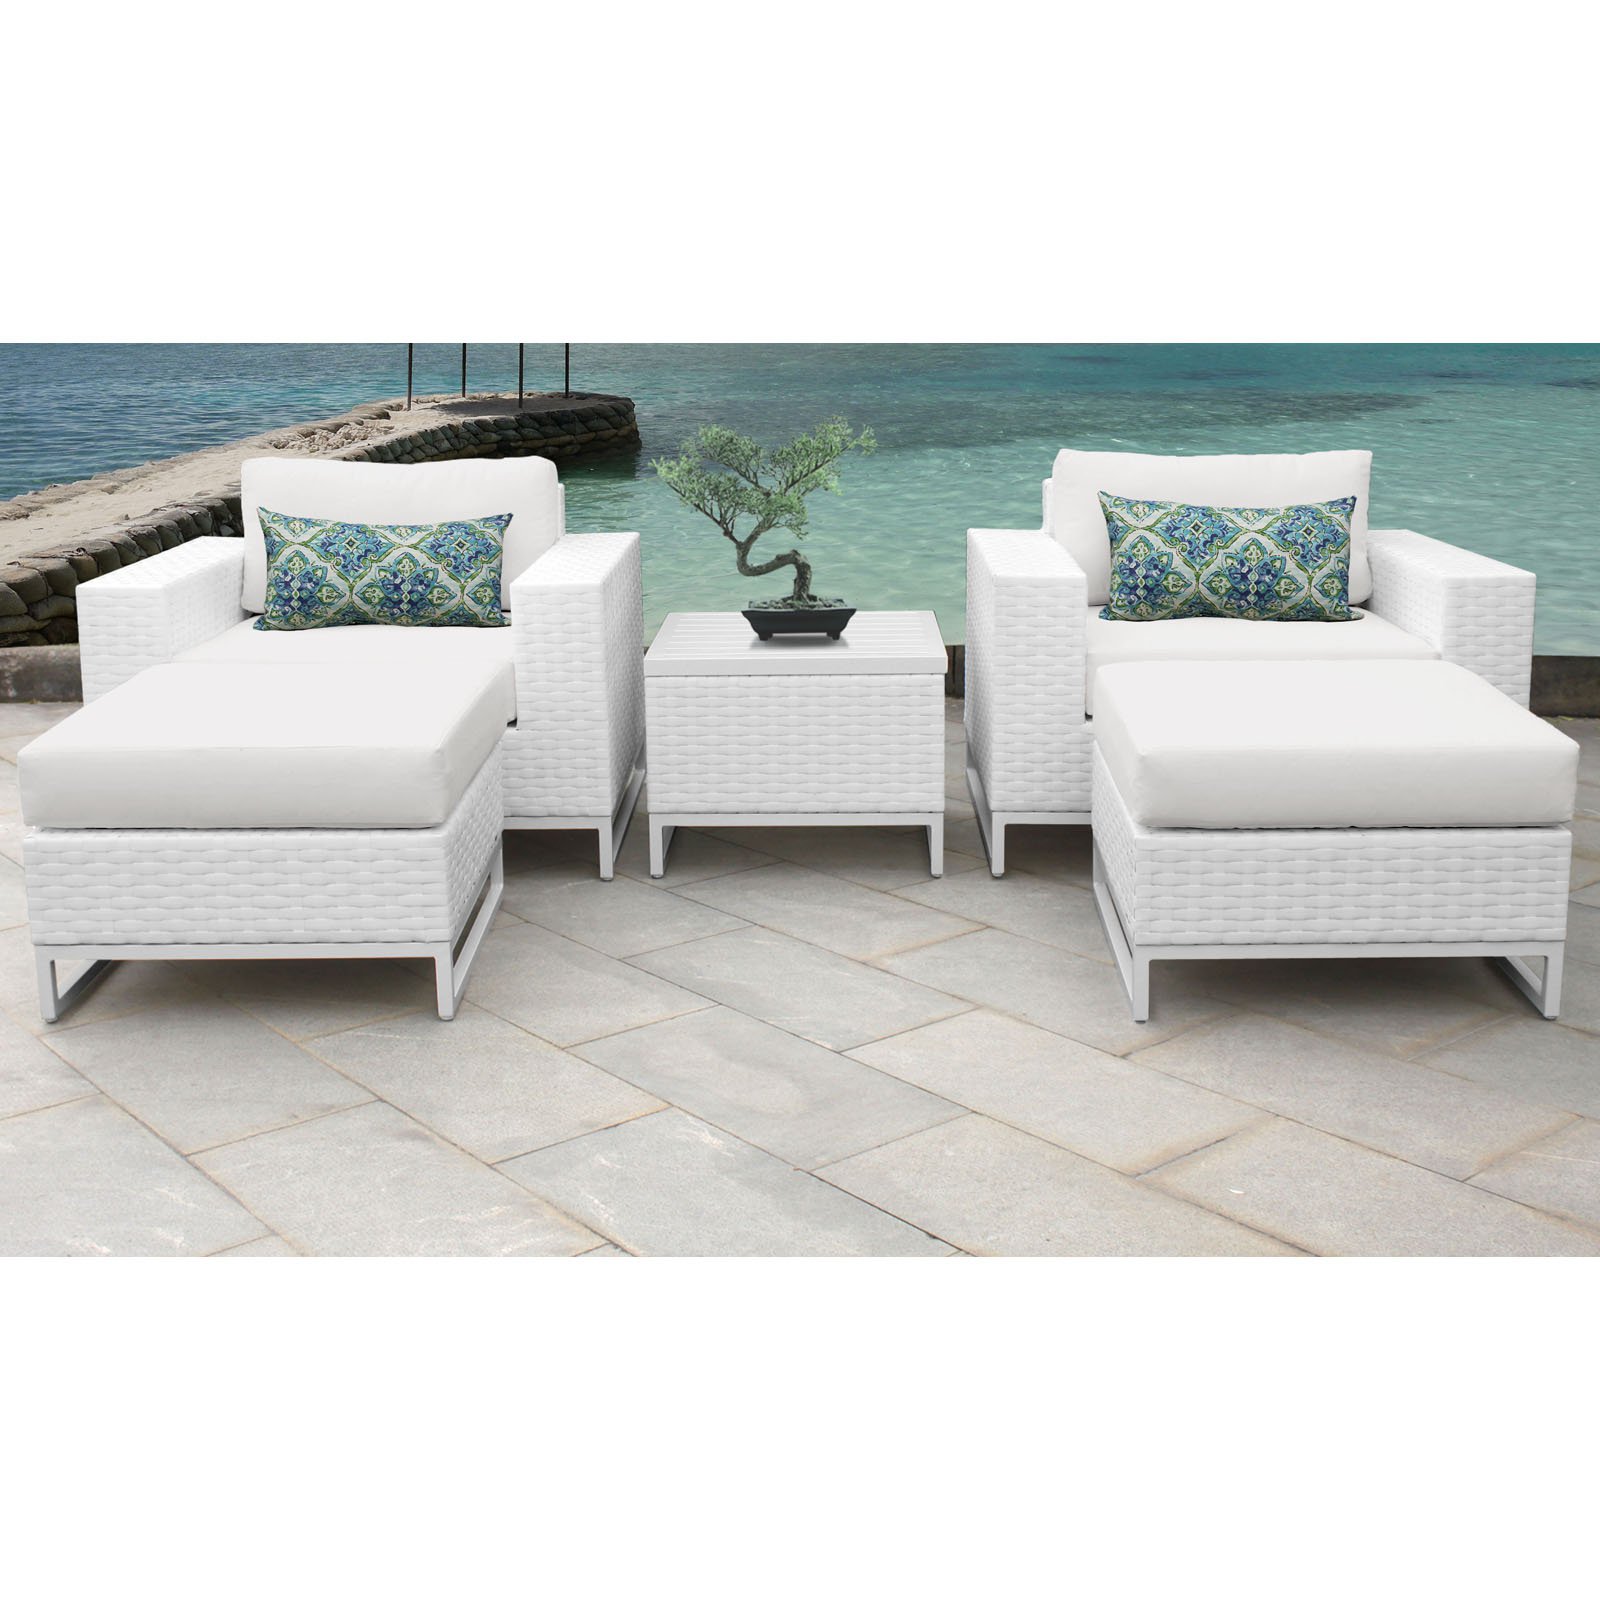 Florida 5-Piece Aluminum Framed Outdoor Conversation Set with Ottomans - image 3 of 3